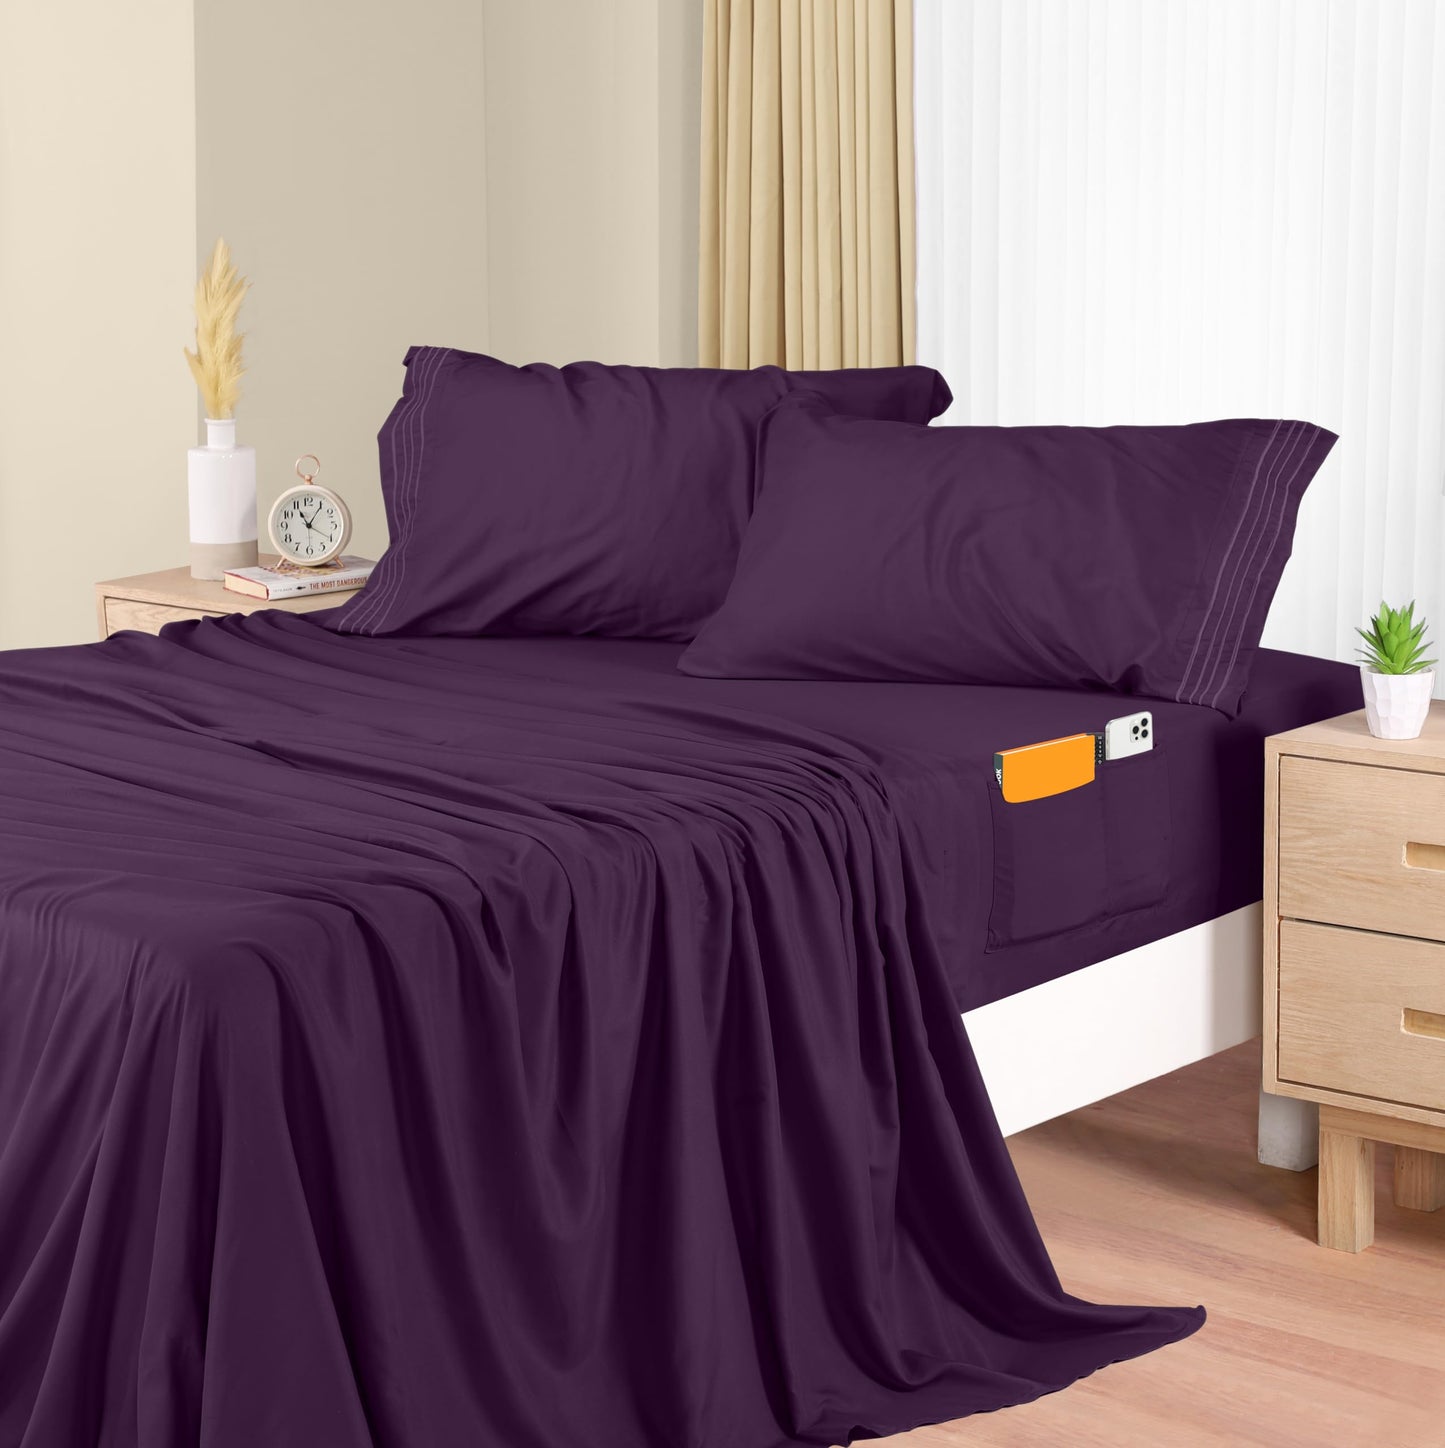 Utopia Bedding King Sheet Set – Soft Microfiber 4 Piece Hotel Luxury Bed Sheets with Deep Pockets - Embroidered Pillow Cases - Side Storage Pocket Fitted Sheet - Flat Sheet (Purple)